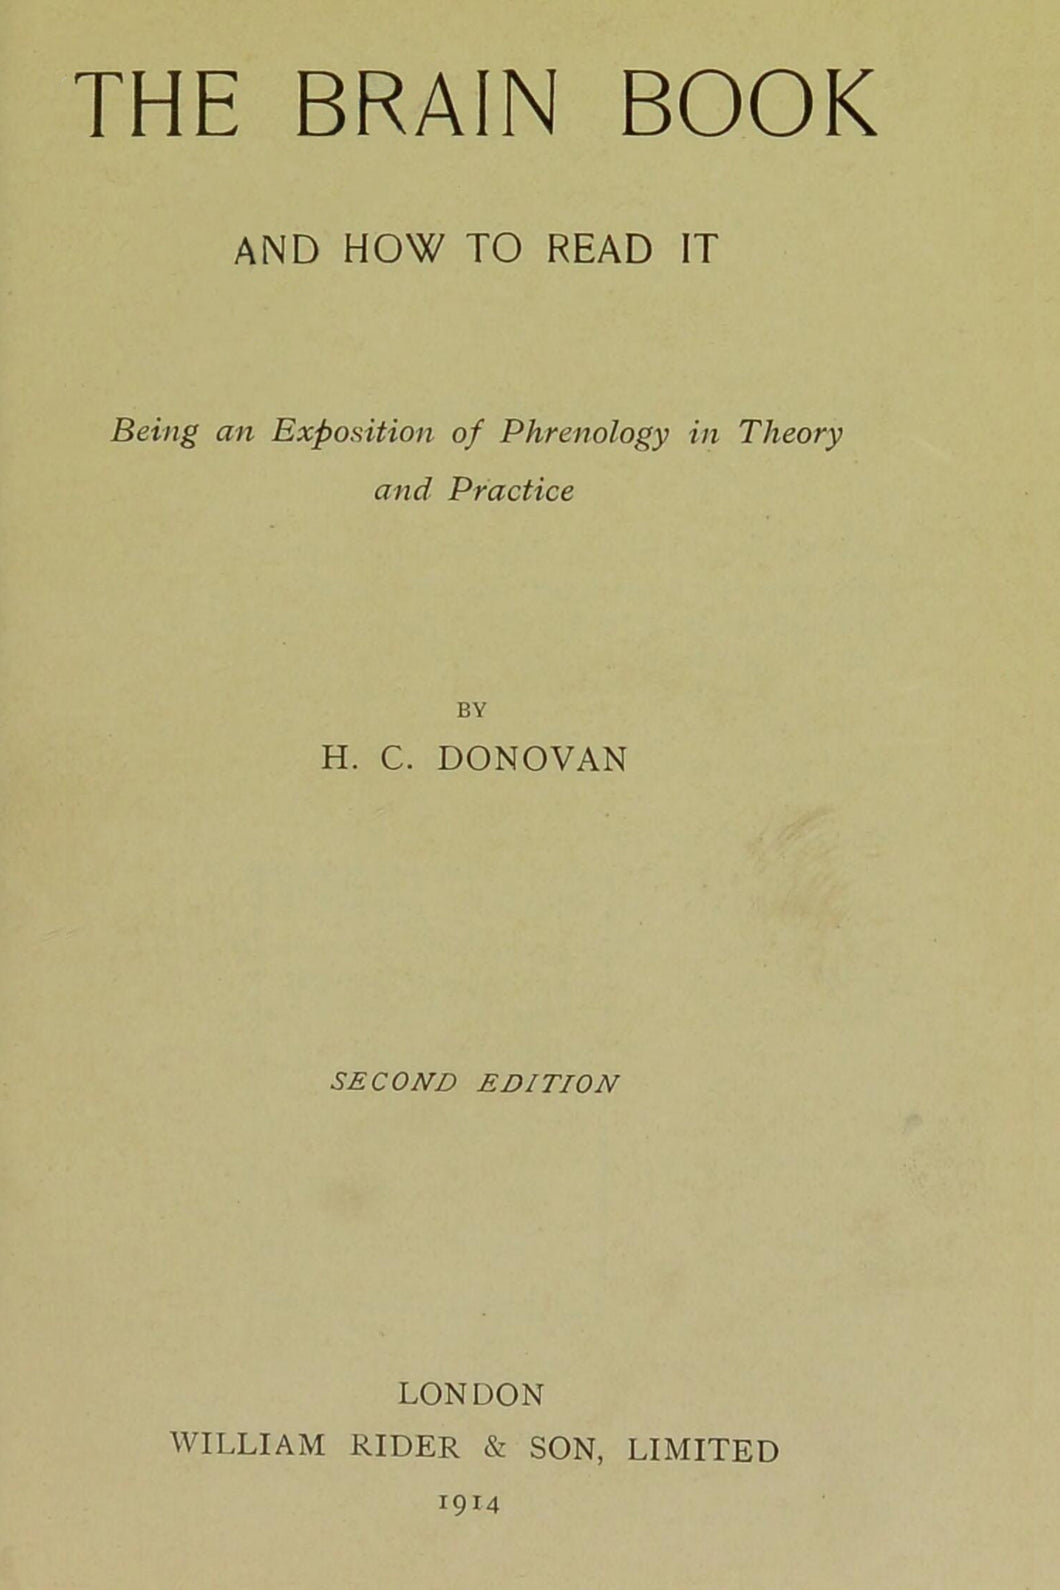 The brain book, and how to read it : being an exposition of phrenology in theory and practice